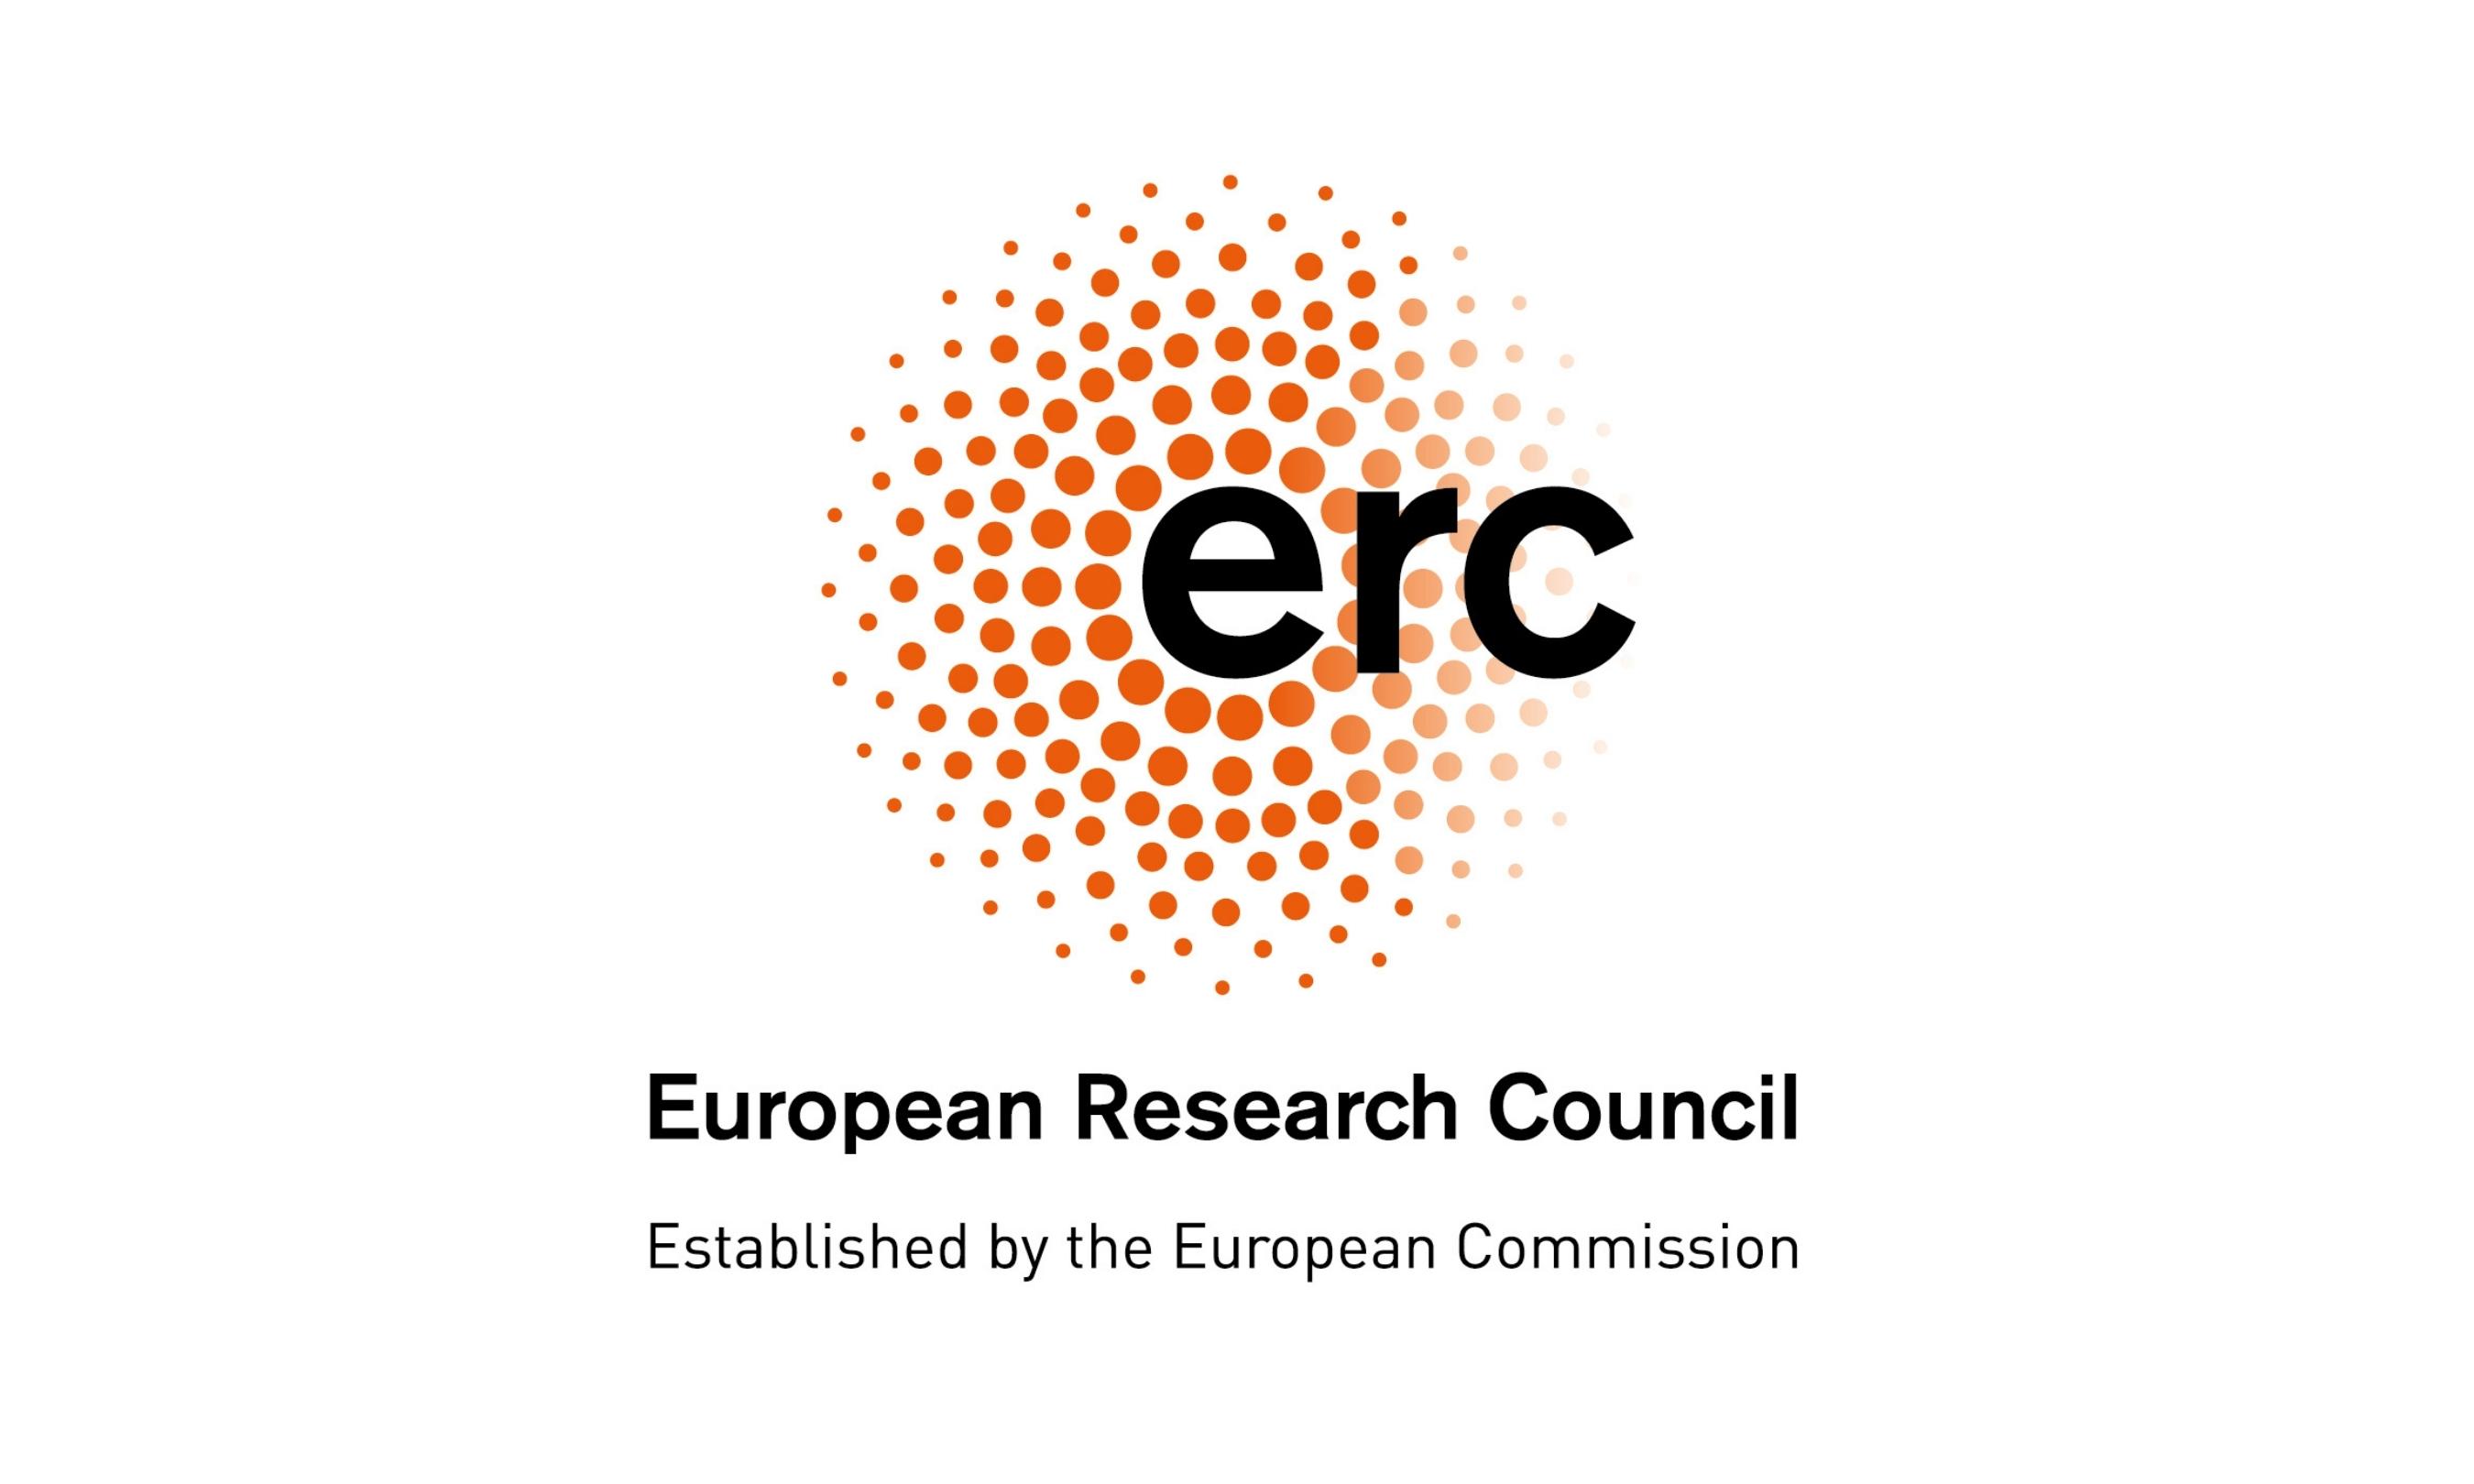 Cover image of Pact for Research & Innovation: the Foundations of the European Research Area still valid and unavoidable